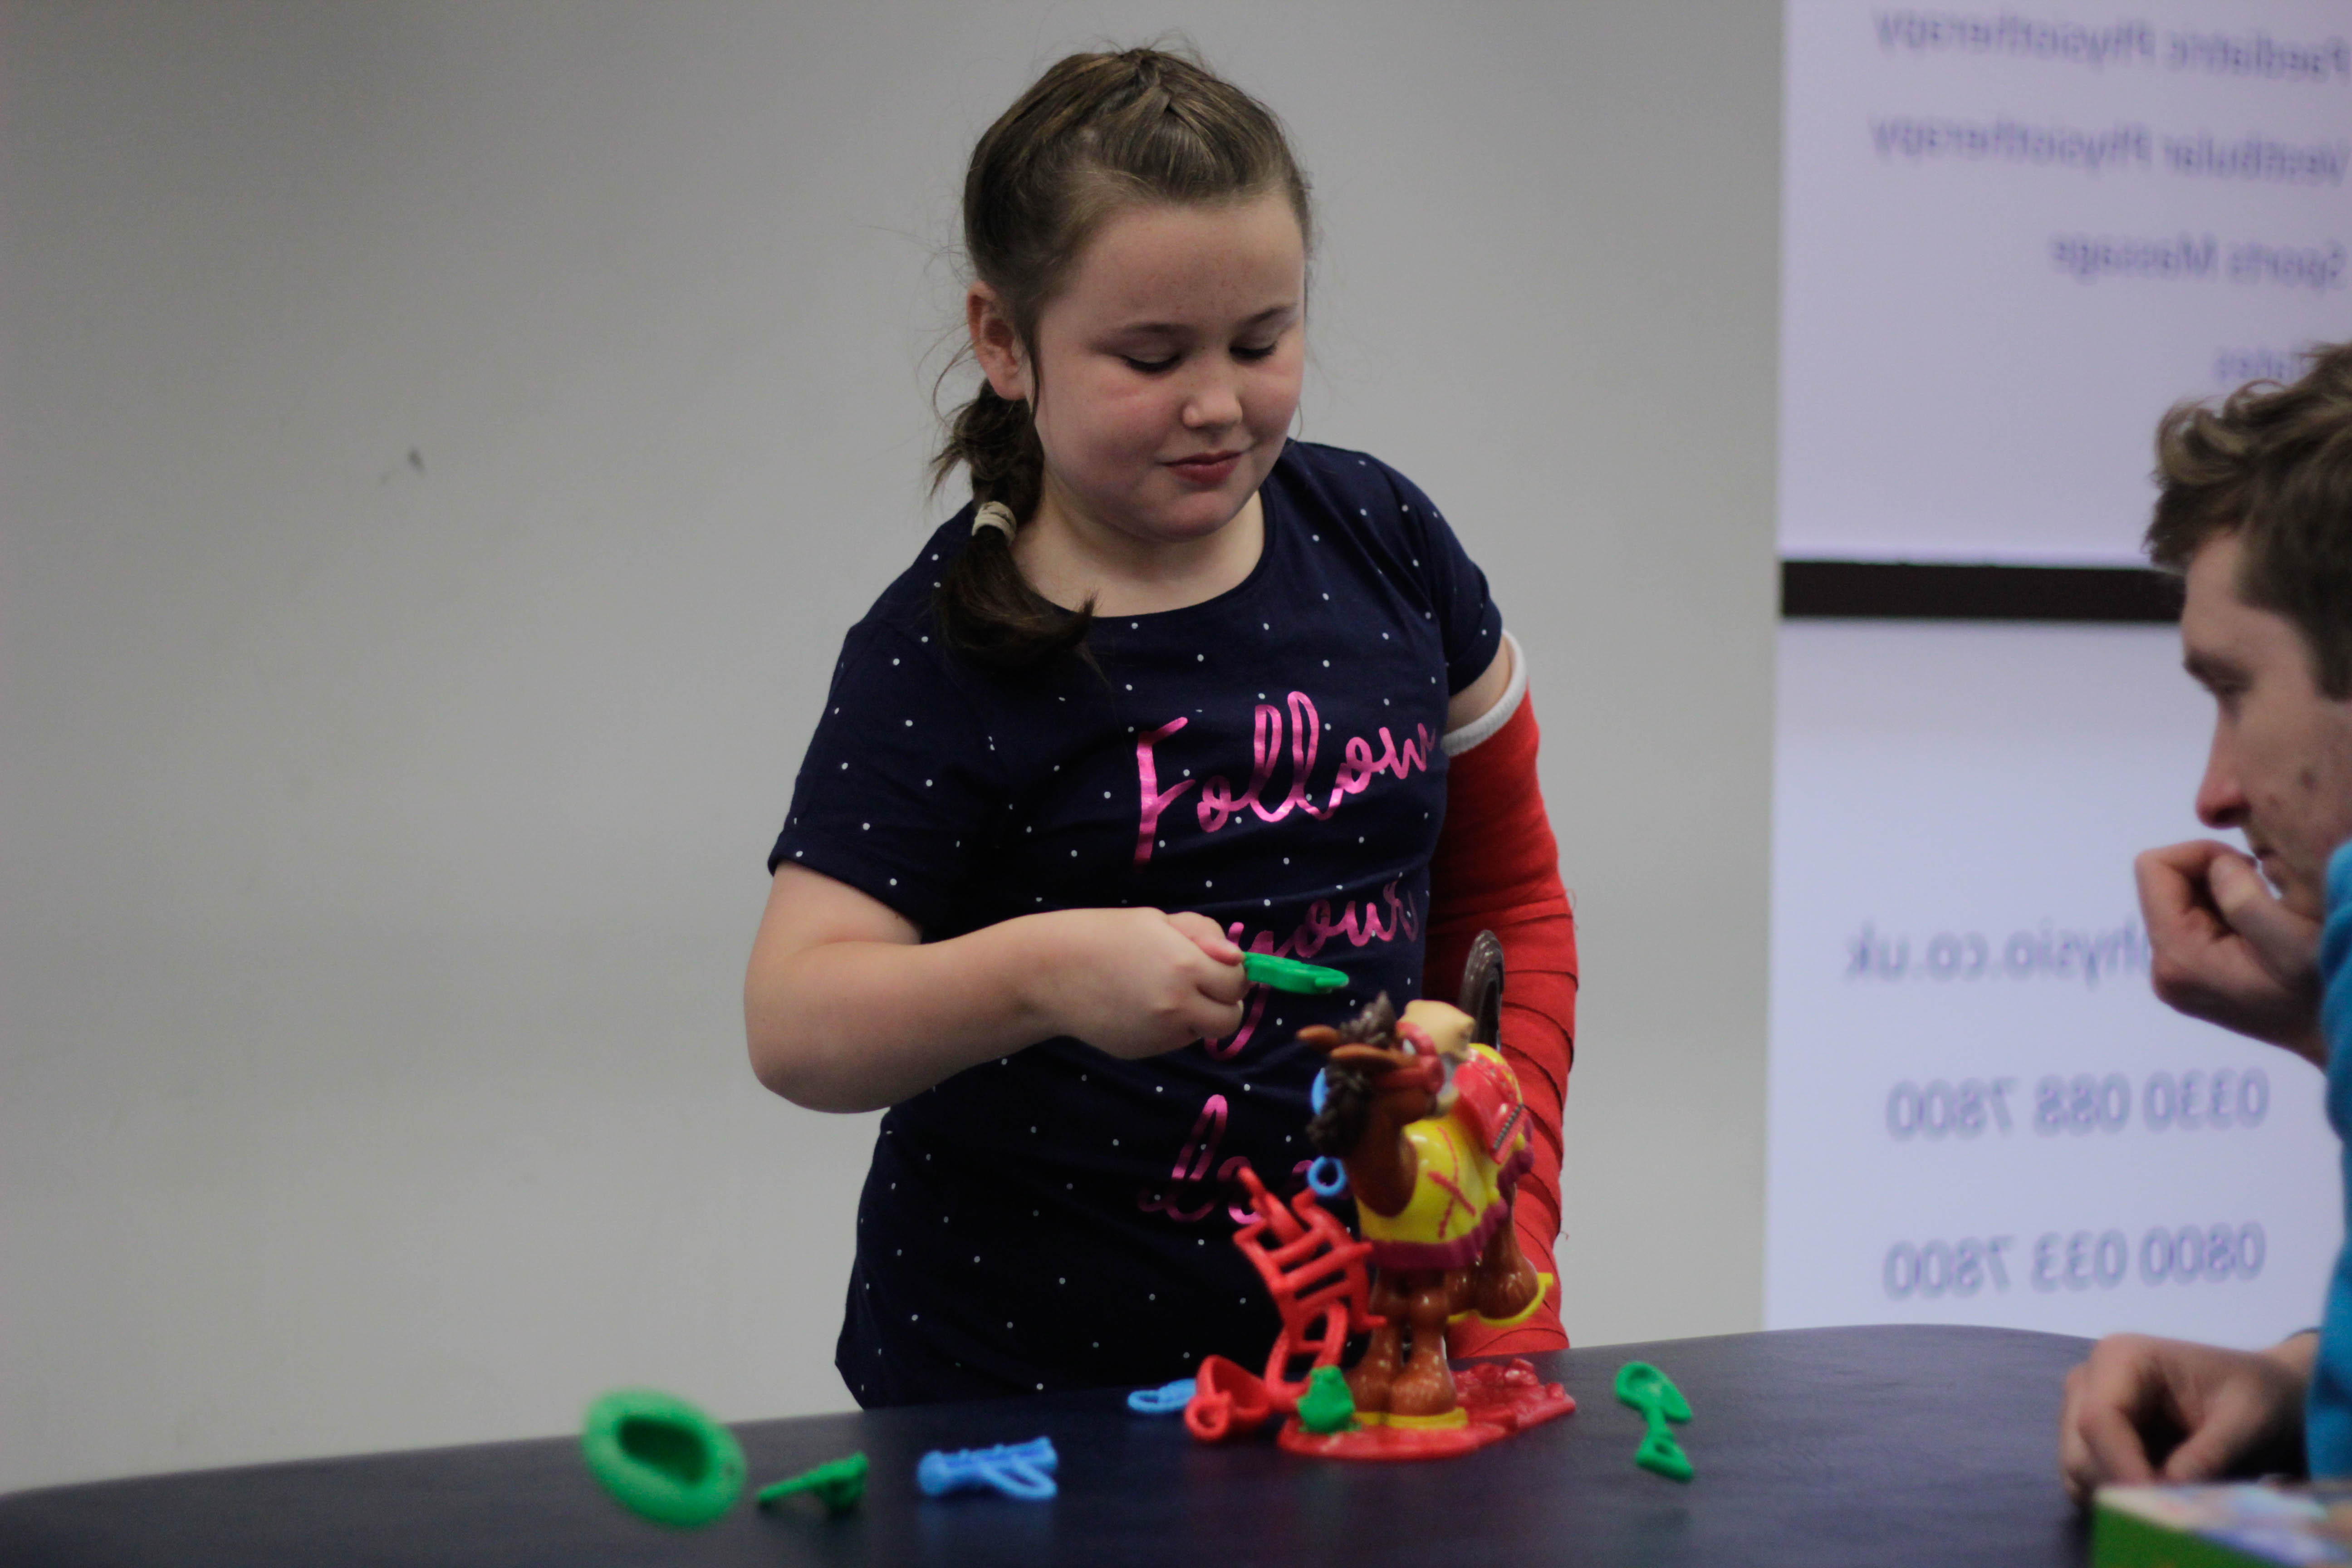 Katie bieng shown how to use the toys during CIMT treatment